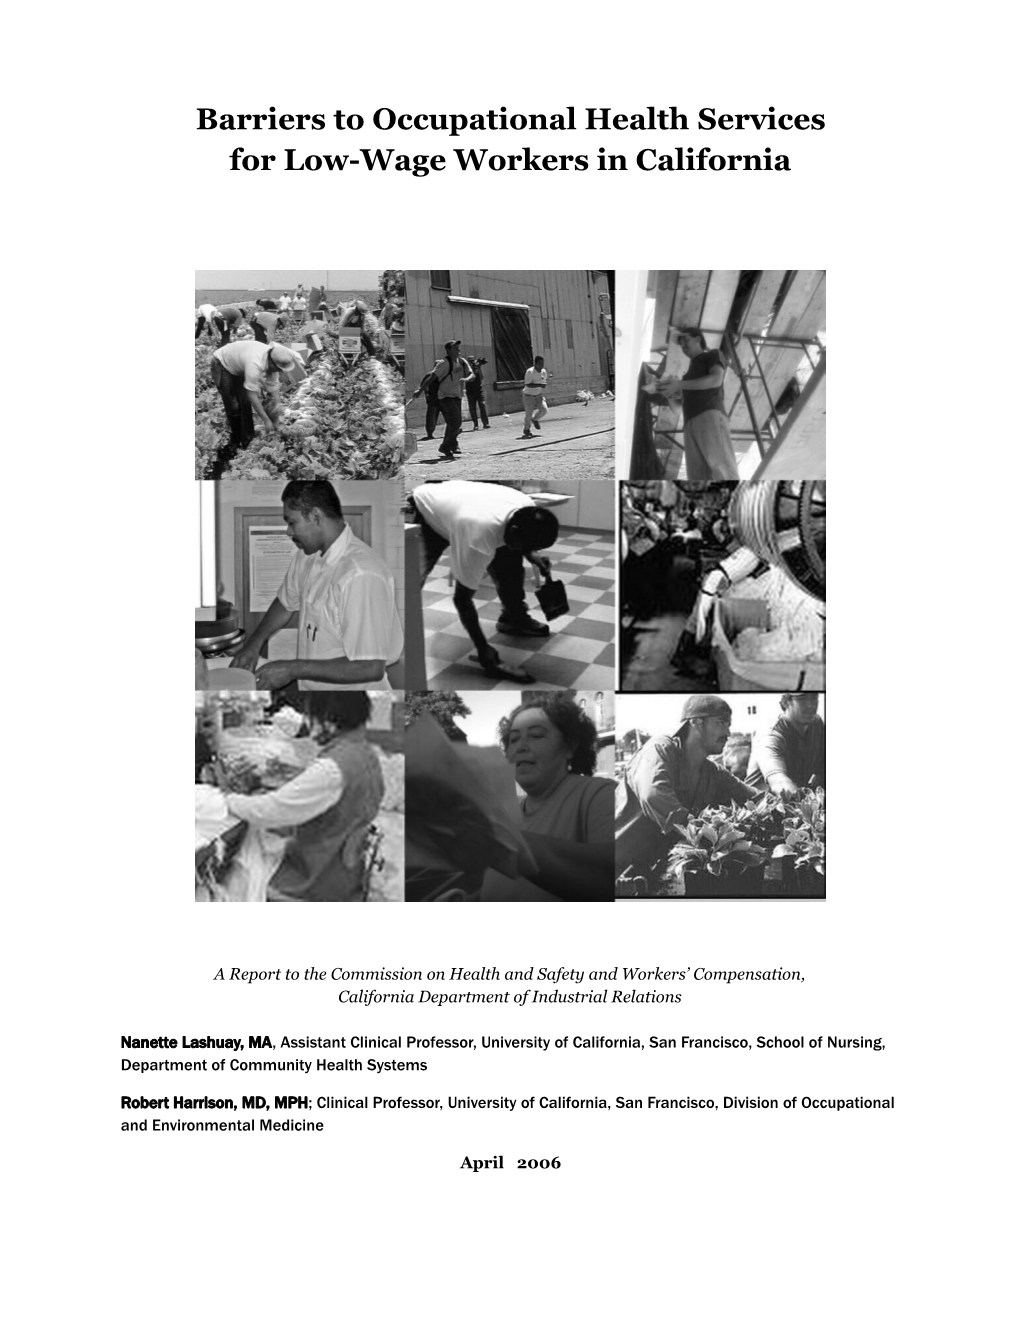 Barriers to Occupational Health Services for Low-Wage Workers in California